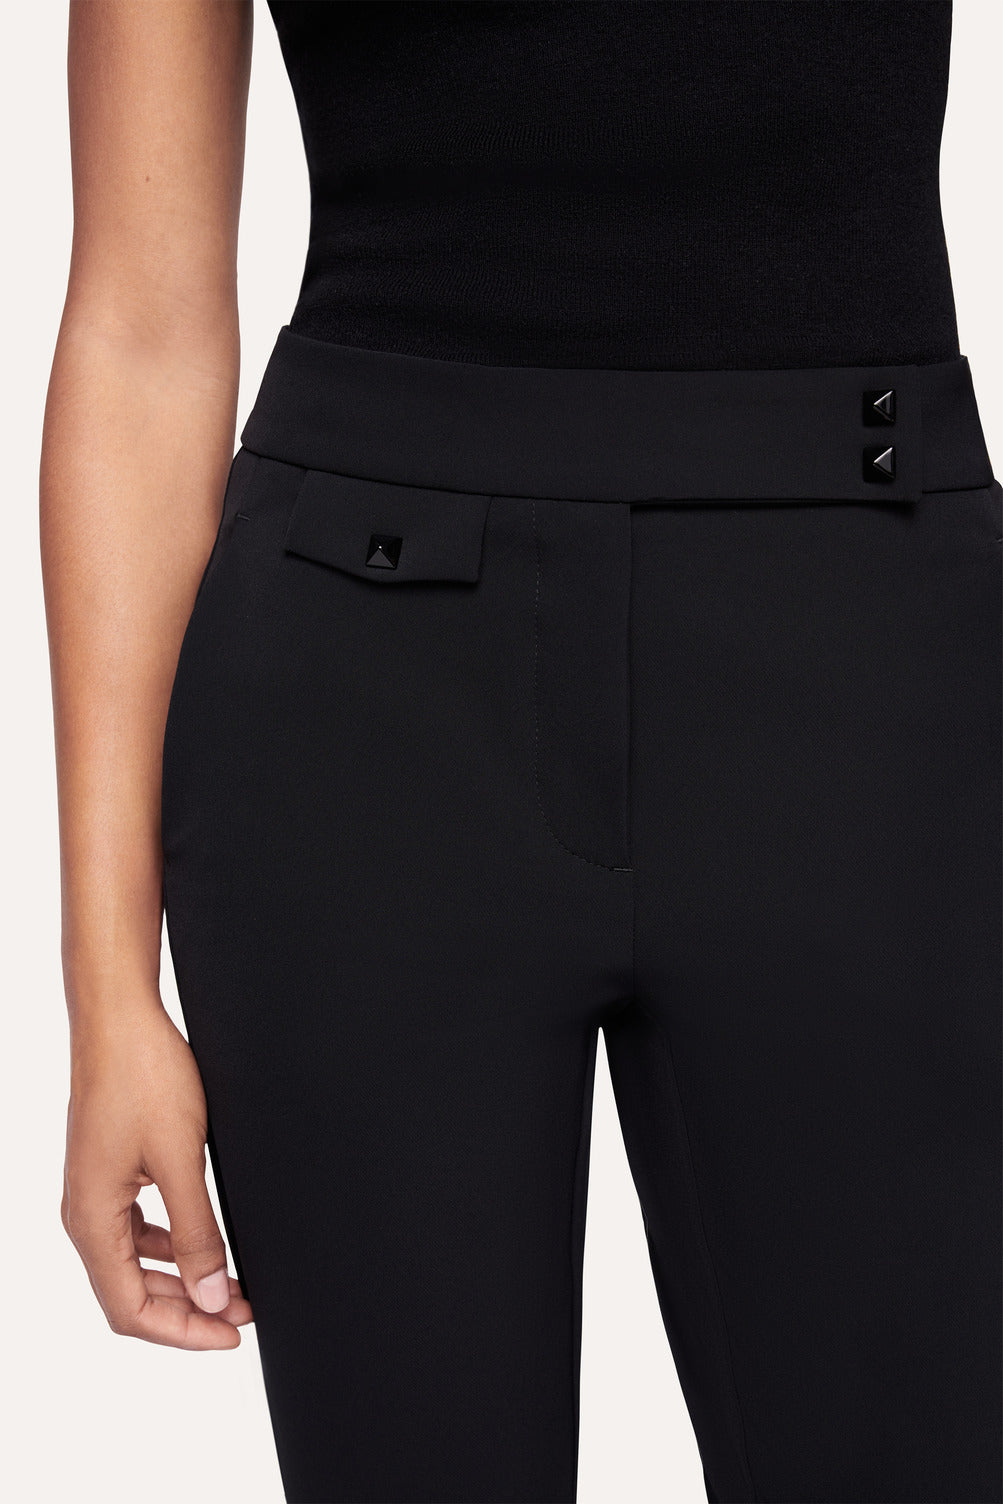 Cambio Scarlet Pant – Très Chic